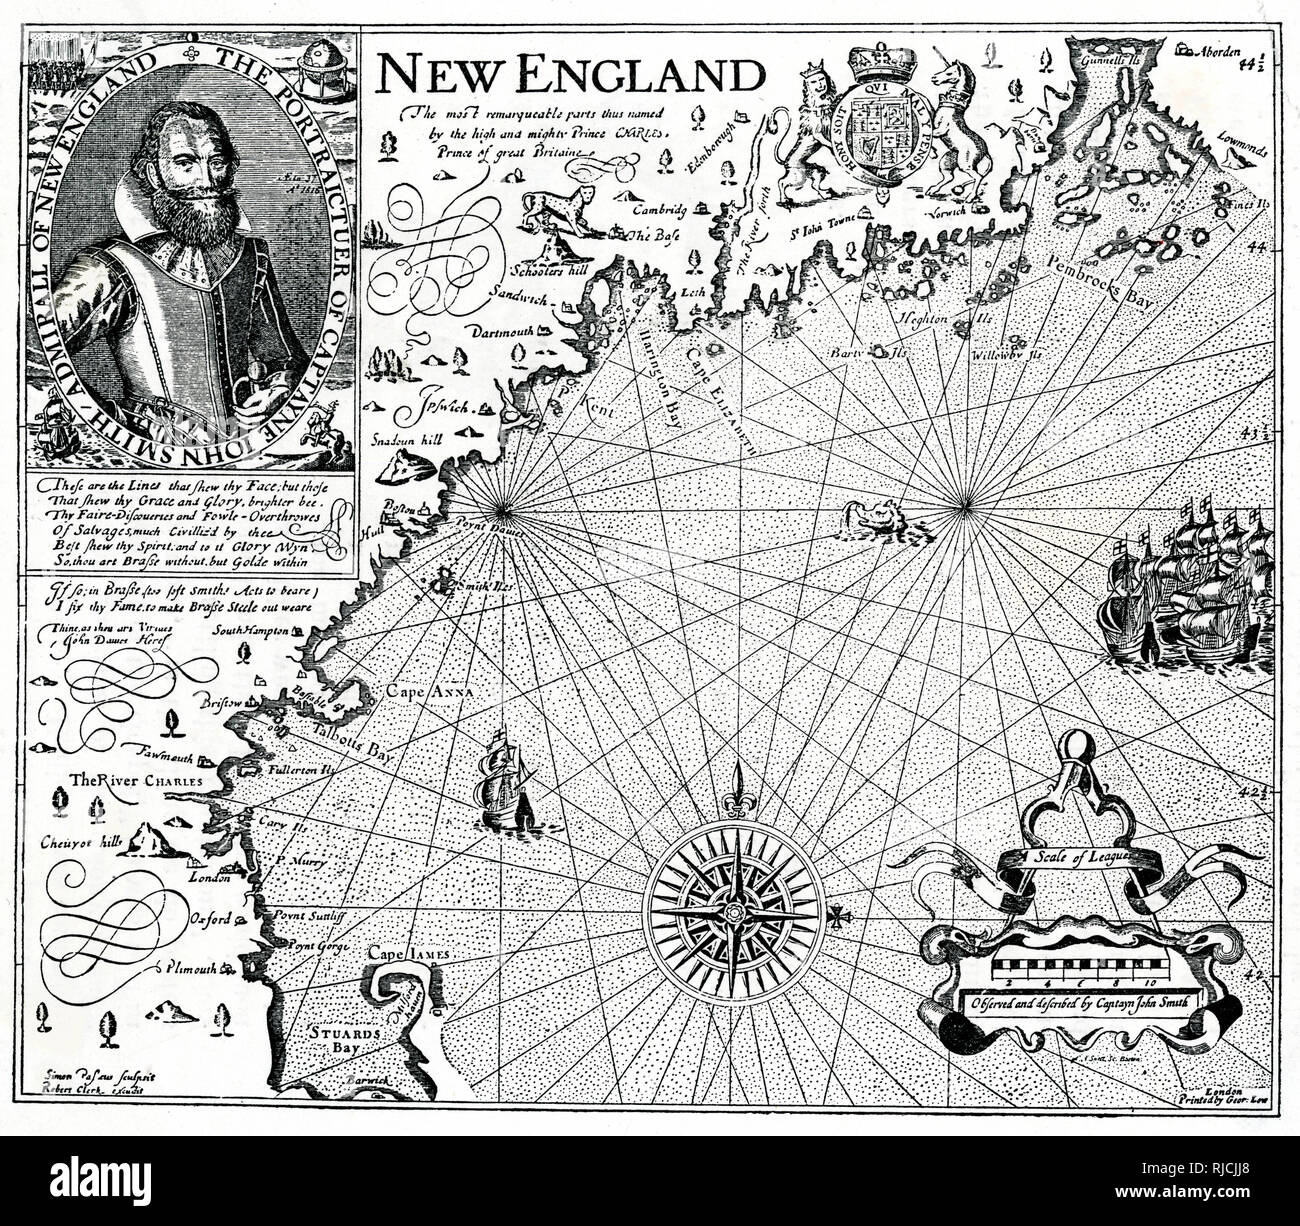 A coastal map of New England, with a portrait of Captain John Smith in the upper left corner. Stock Photo